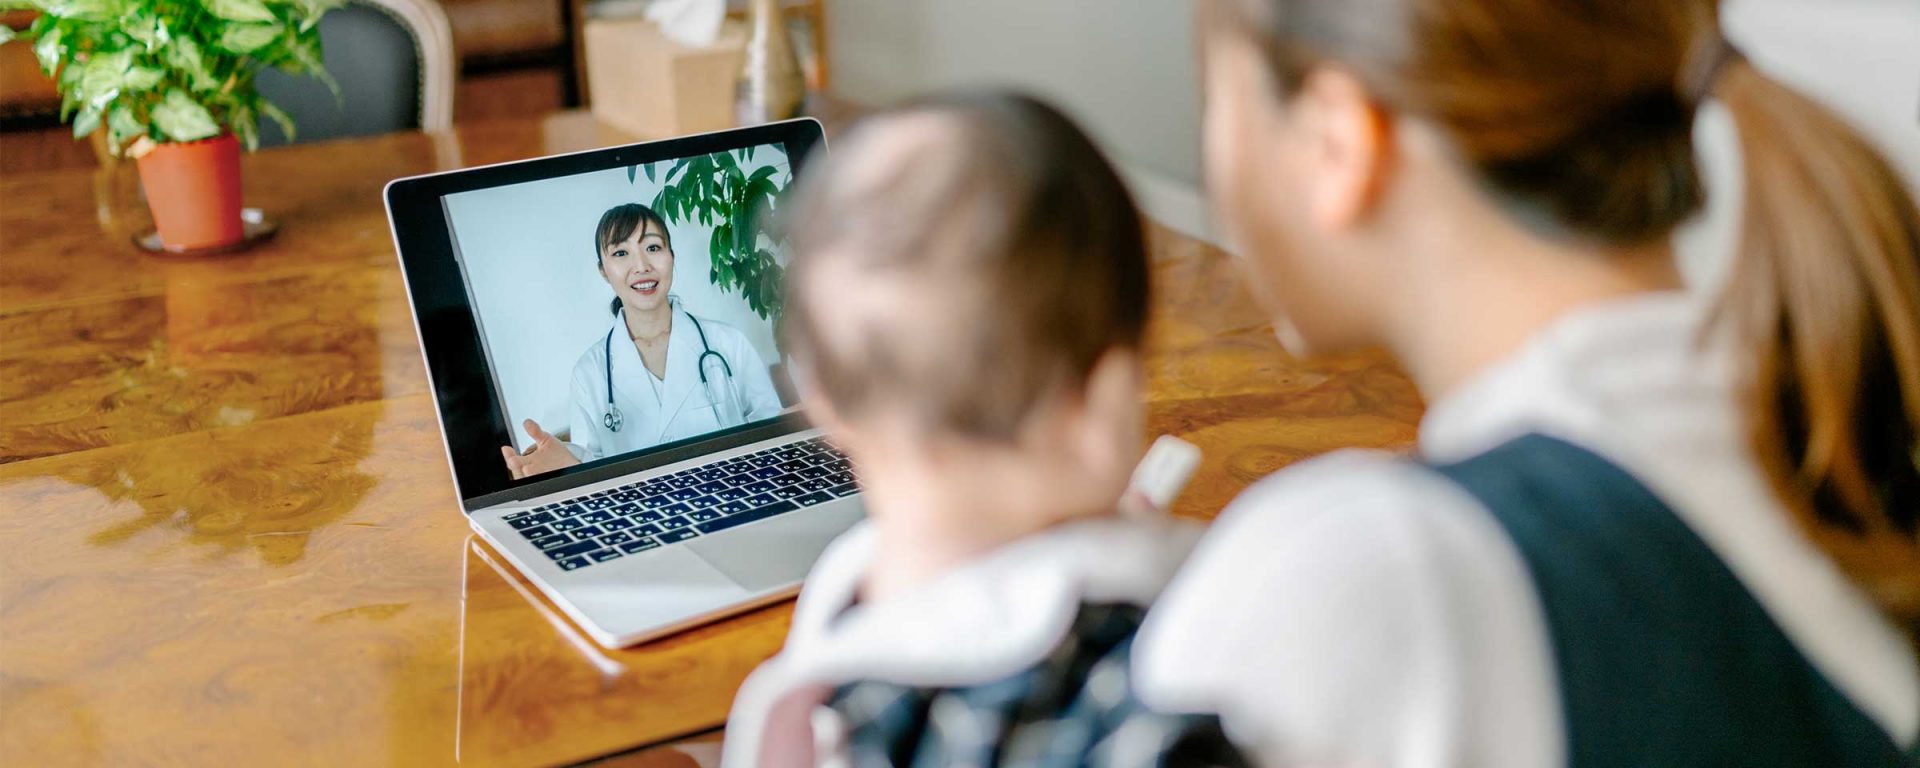 Woman with child speaking to a doctor via a telehealth conference on a laptop